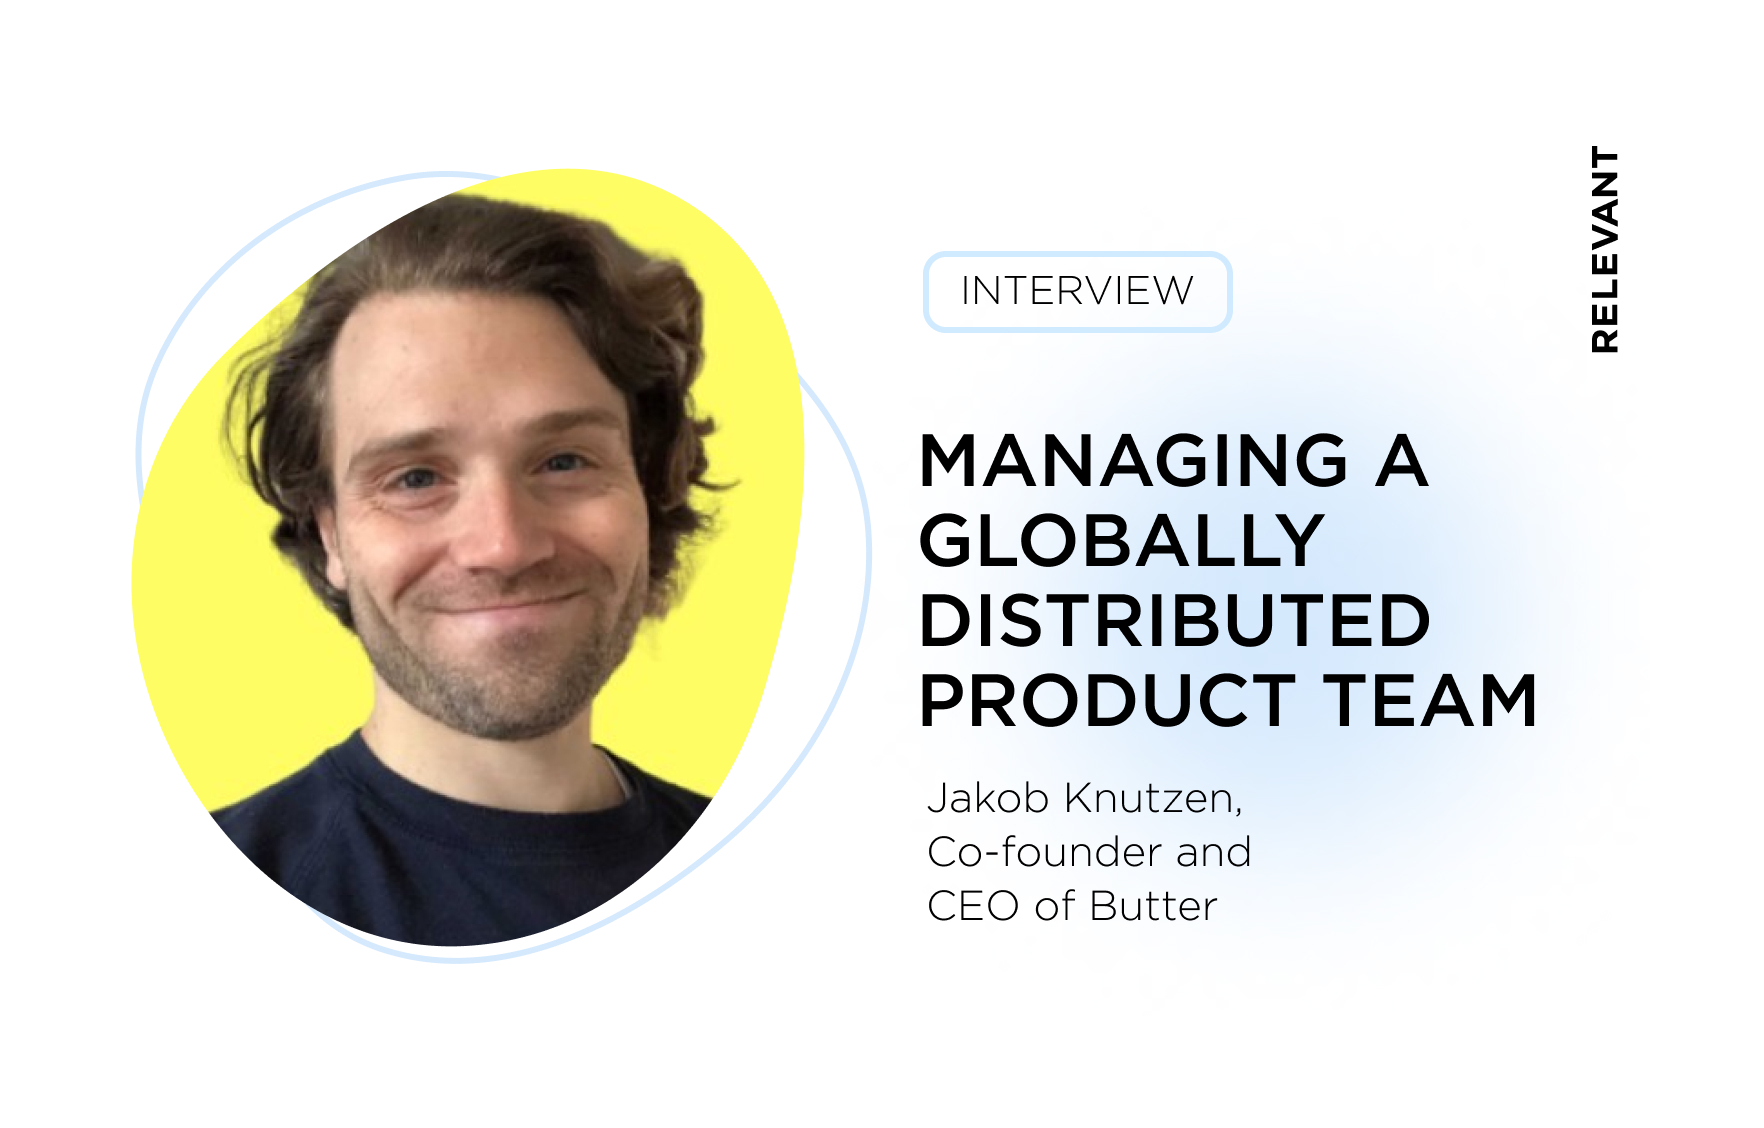 How to Build and Manage a Product Team Distributed Across 11 Countries, Jakob Knutzen, CEO of Butter